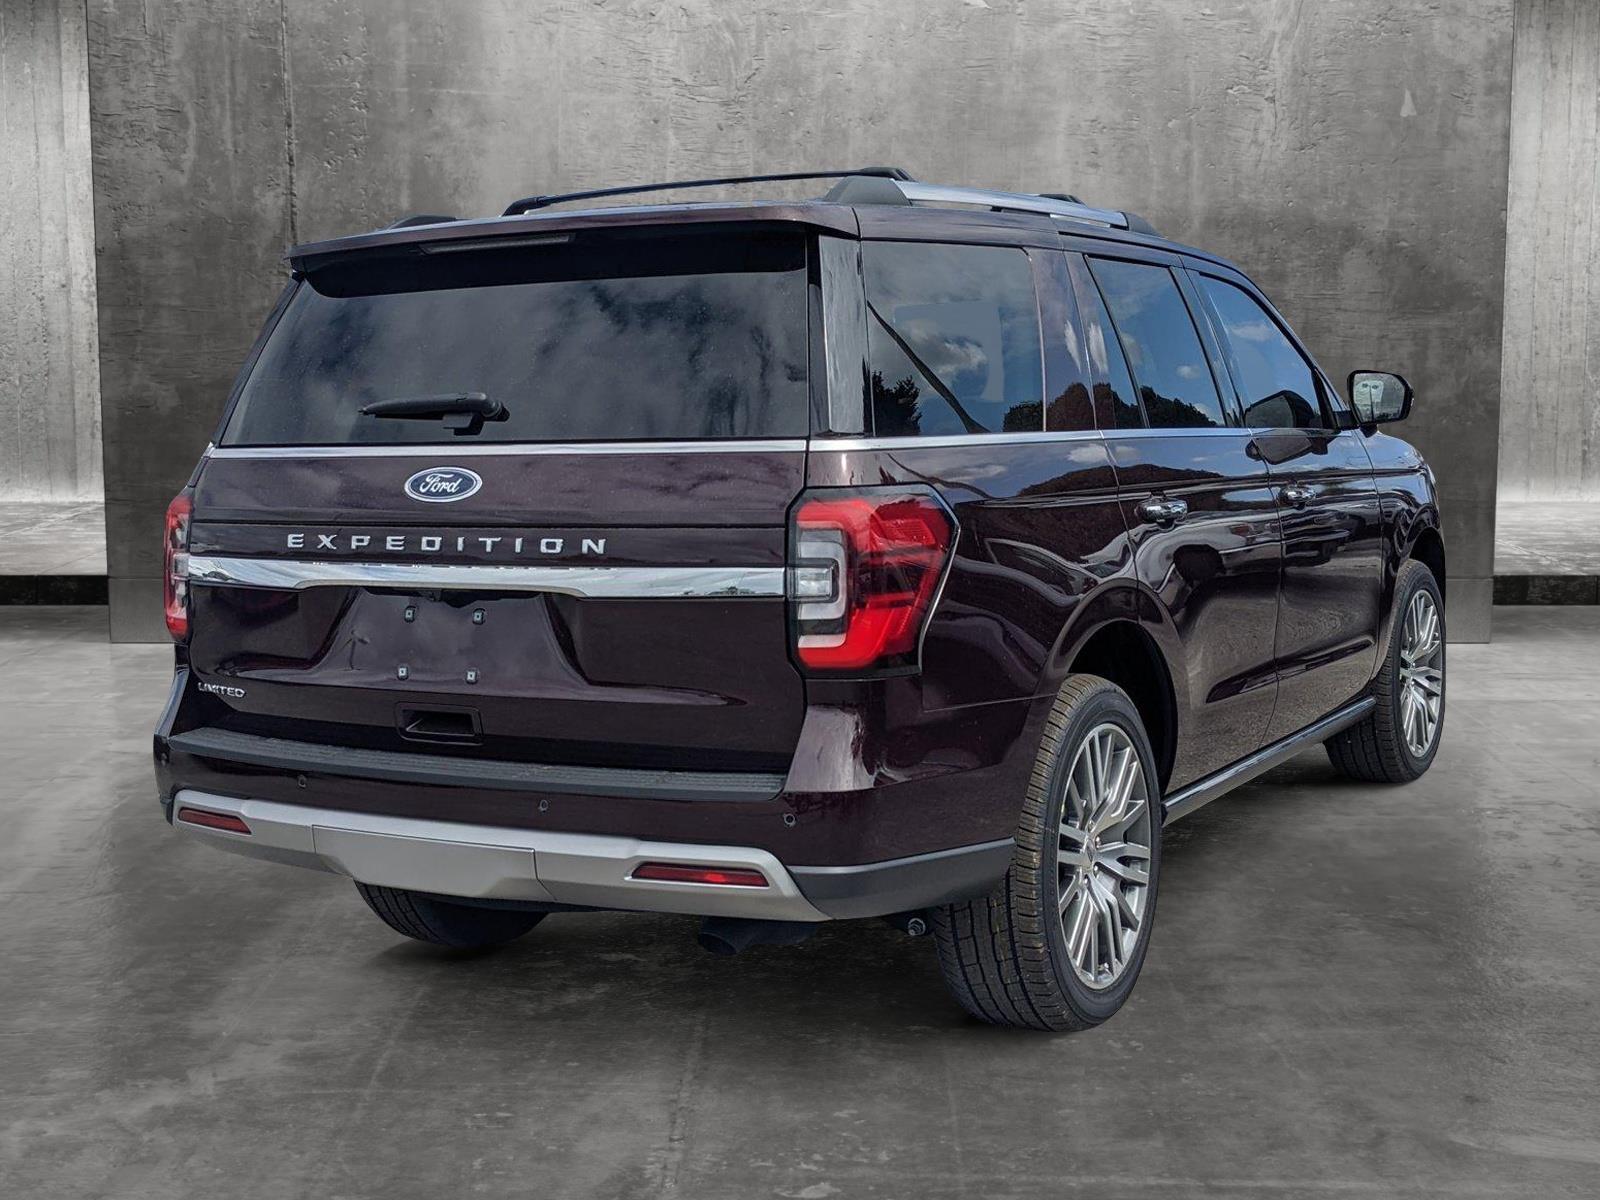 Ford Expedition #1 Hero Image